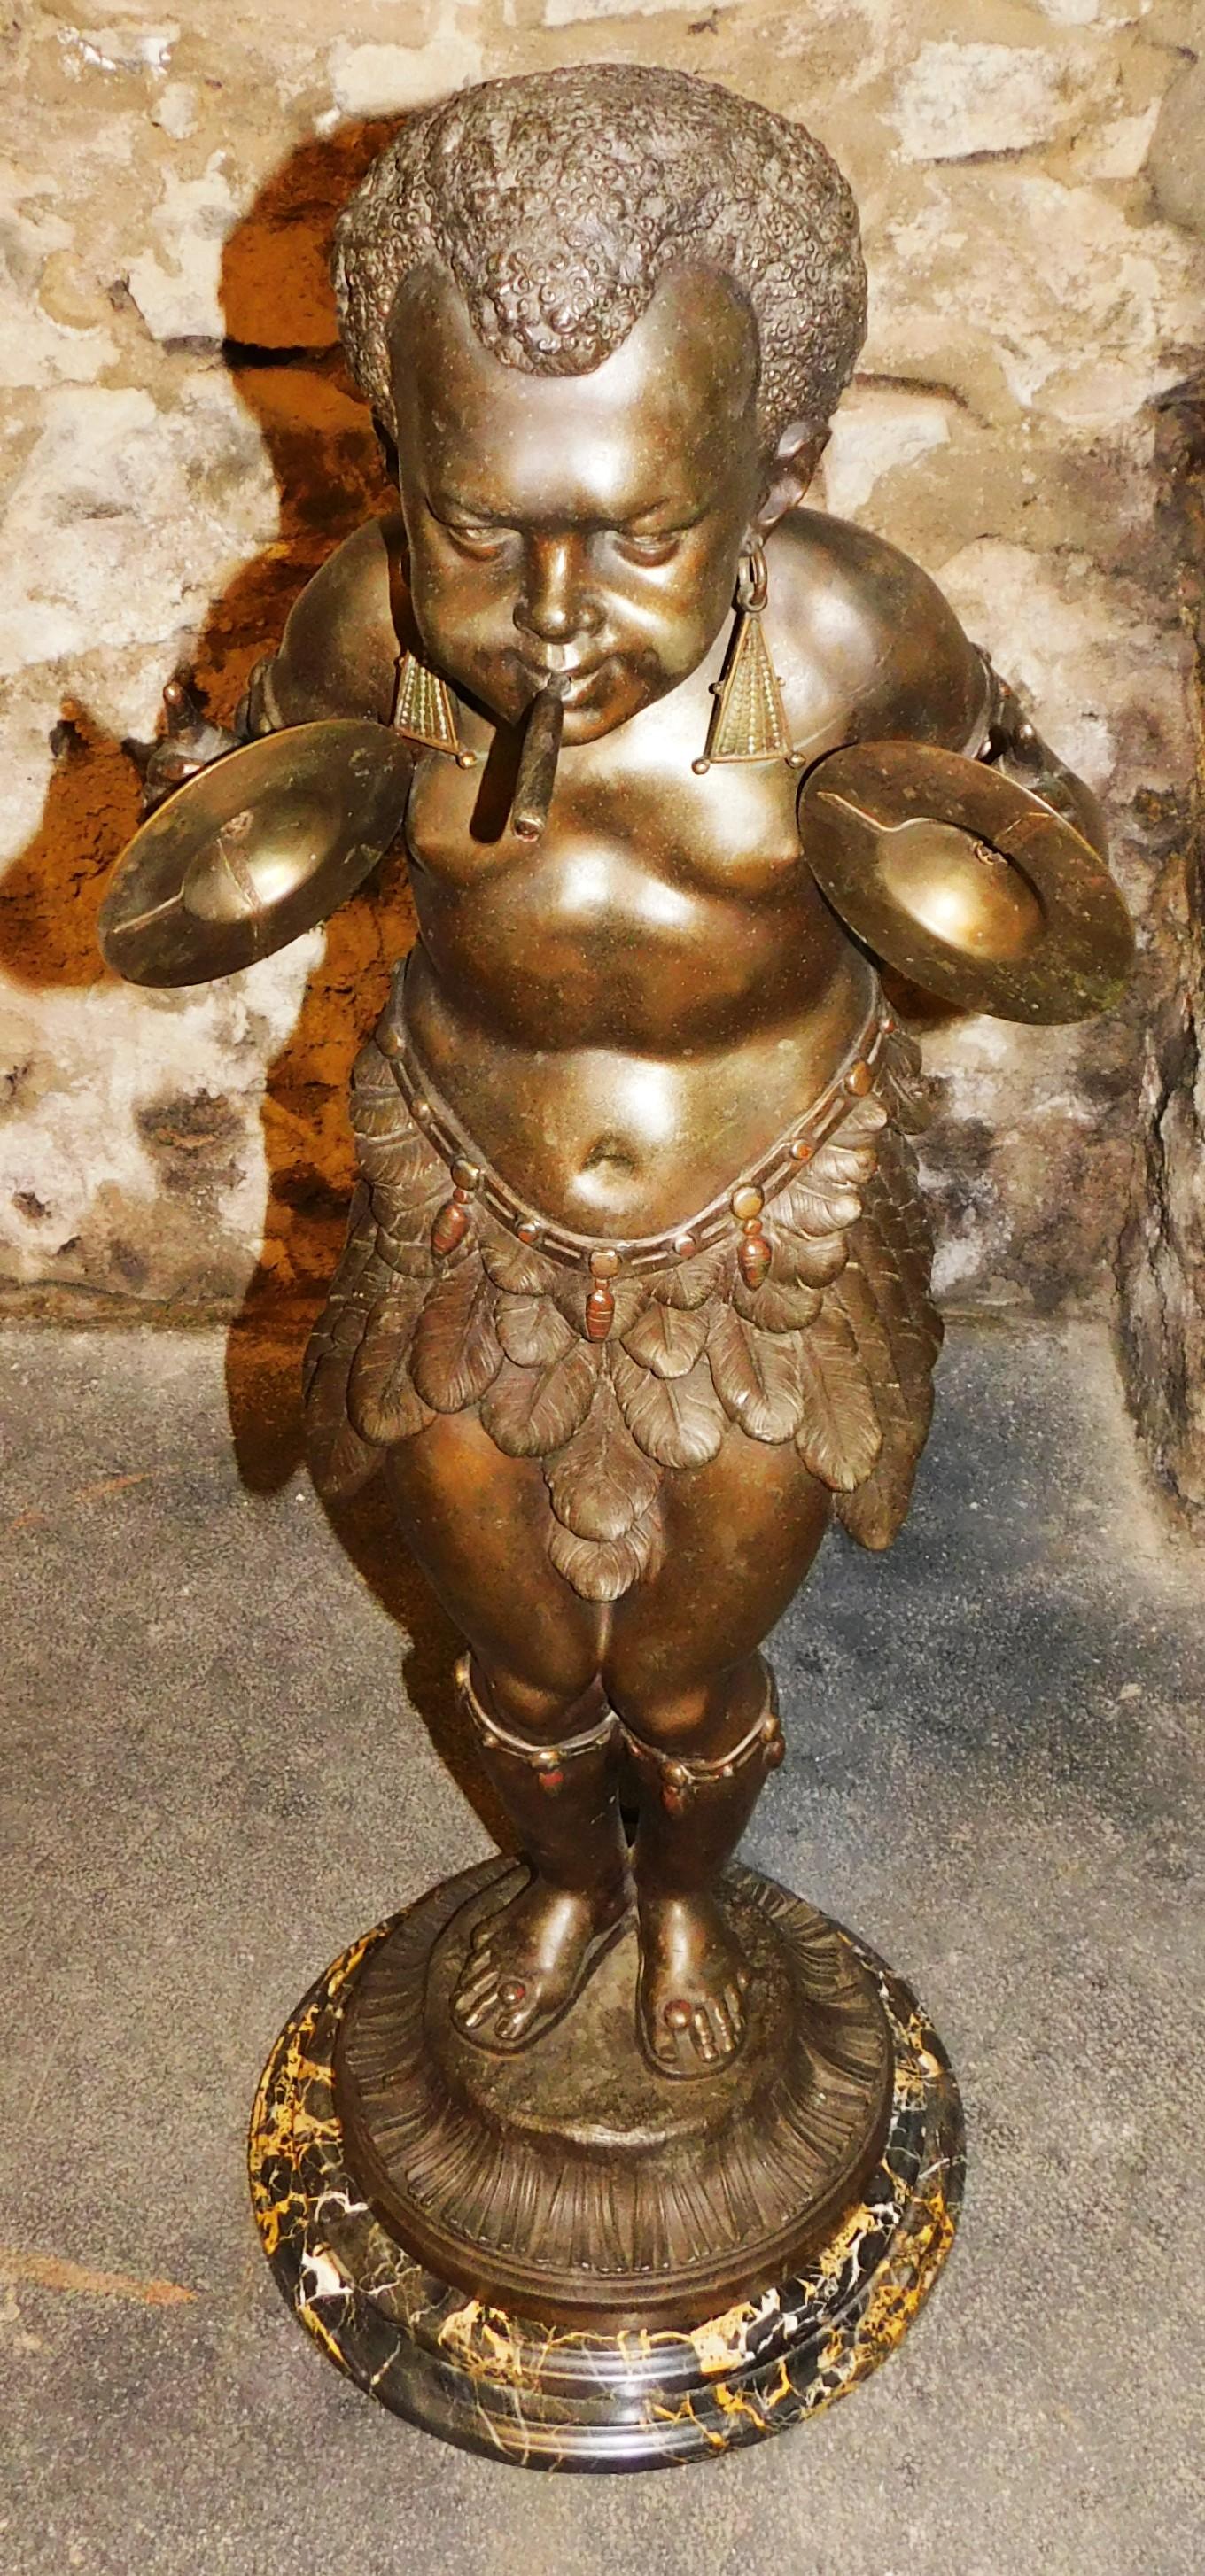 Made in Paris France, antique 19th century bronze African Pygmy playing cymbals with a cigar in mouth. The cigar can be lit with gas, the gas valve fitting on the back is in working condition it will turn on and off. The marble base has been added